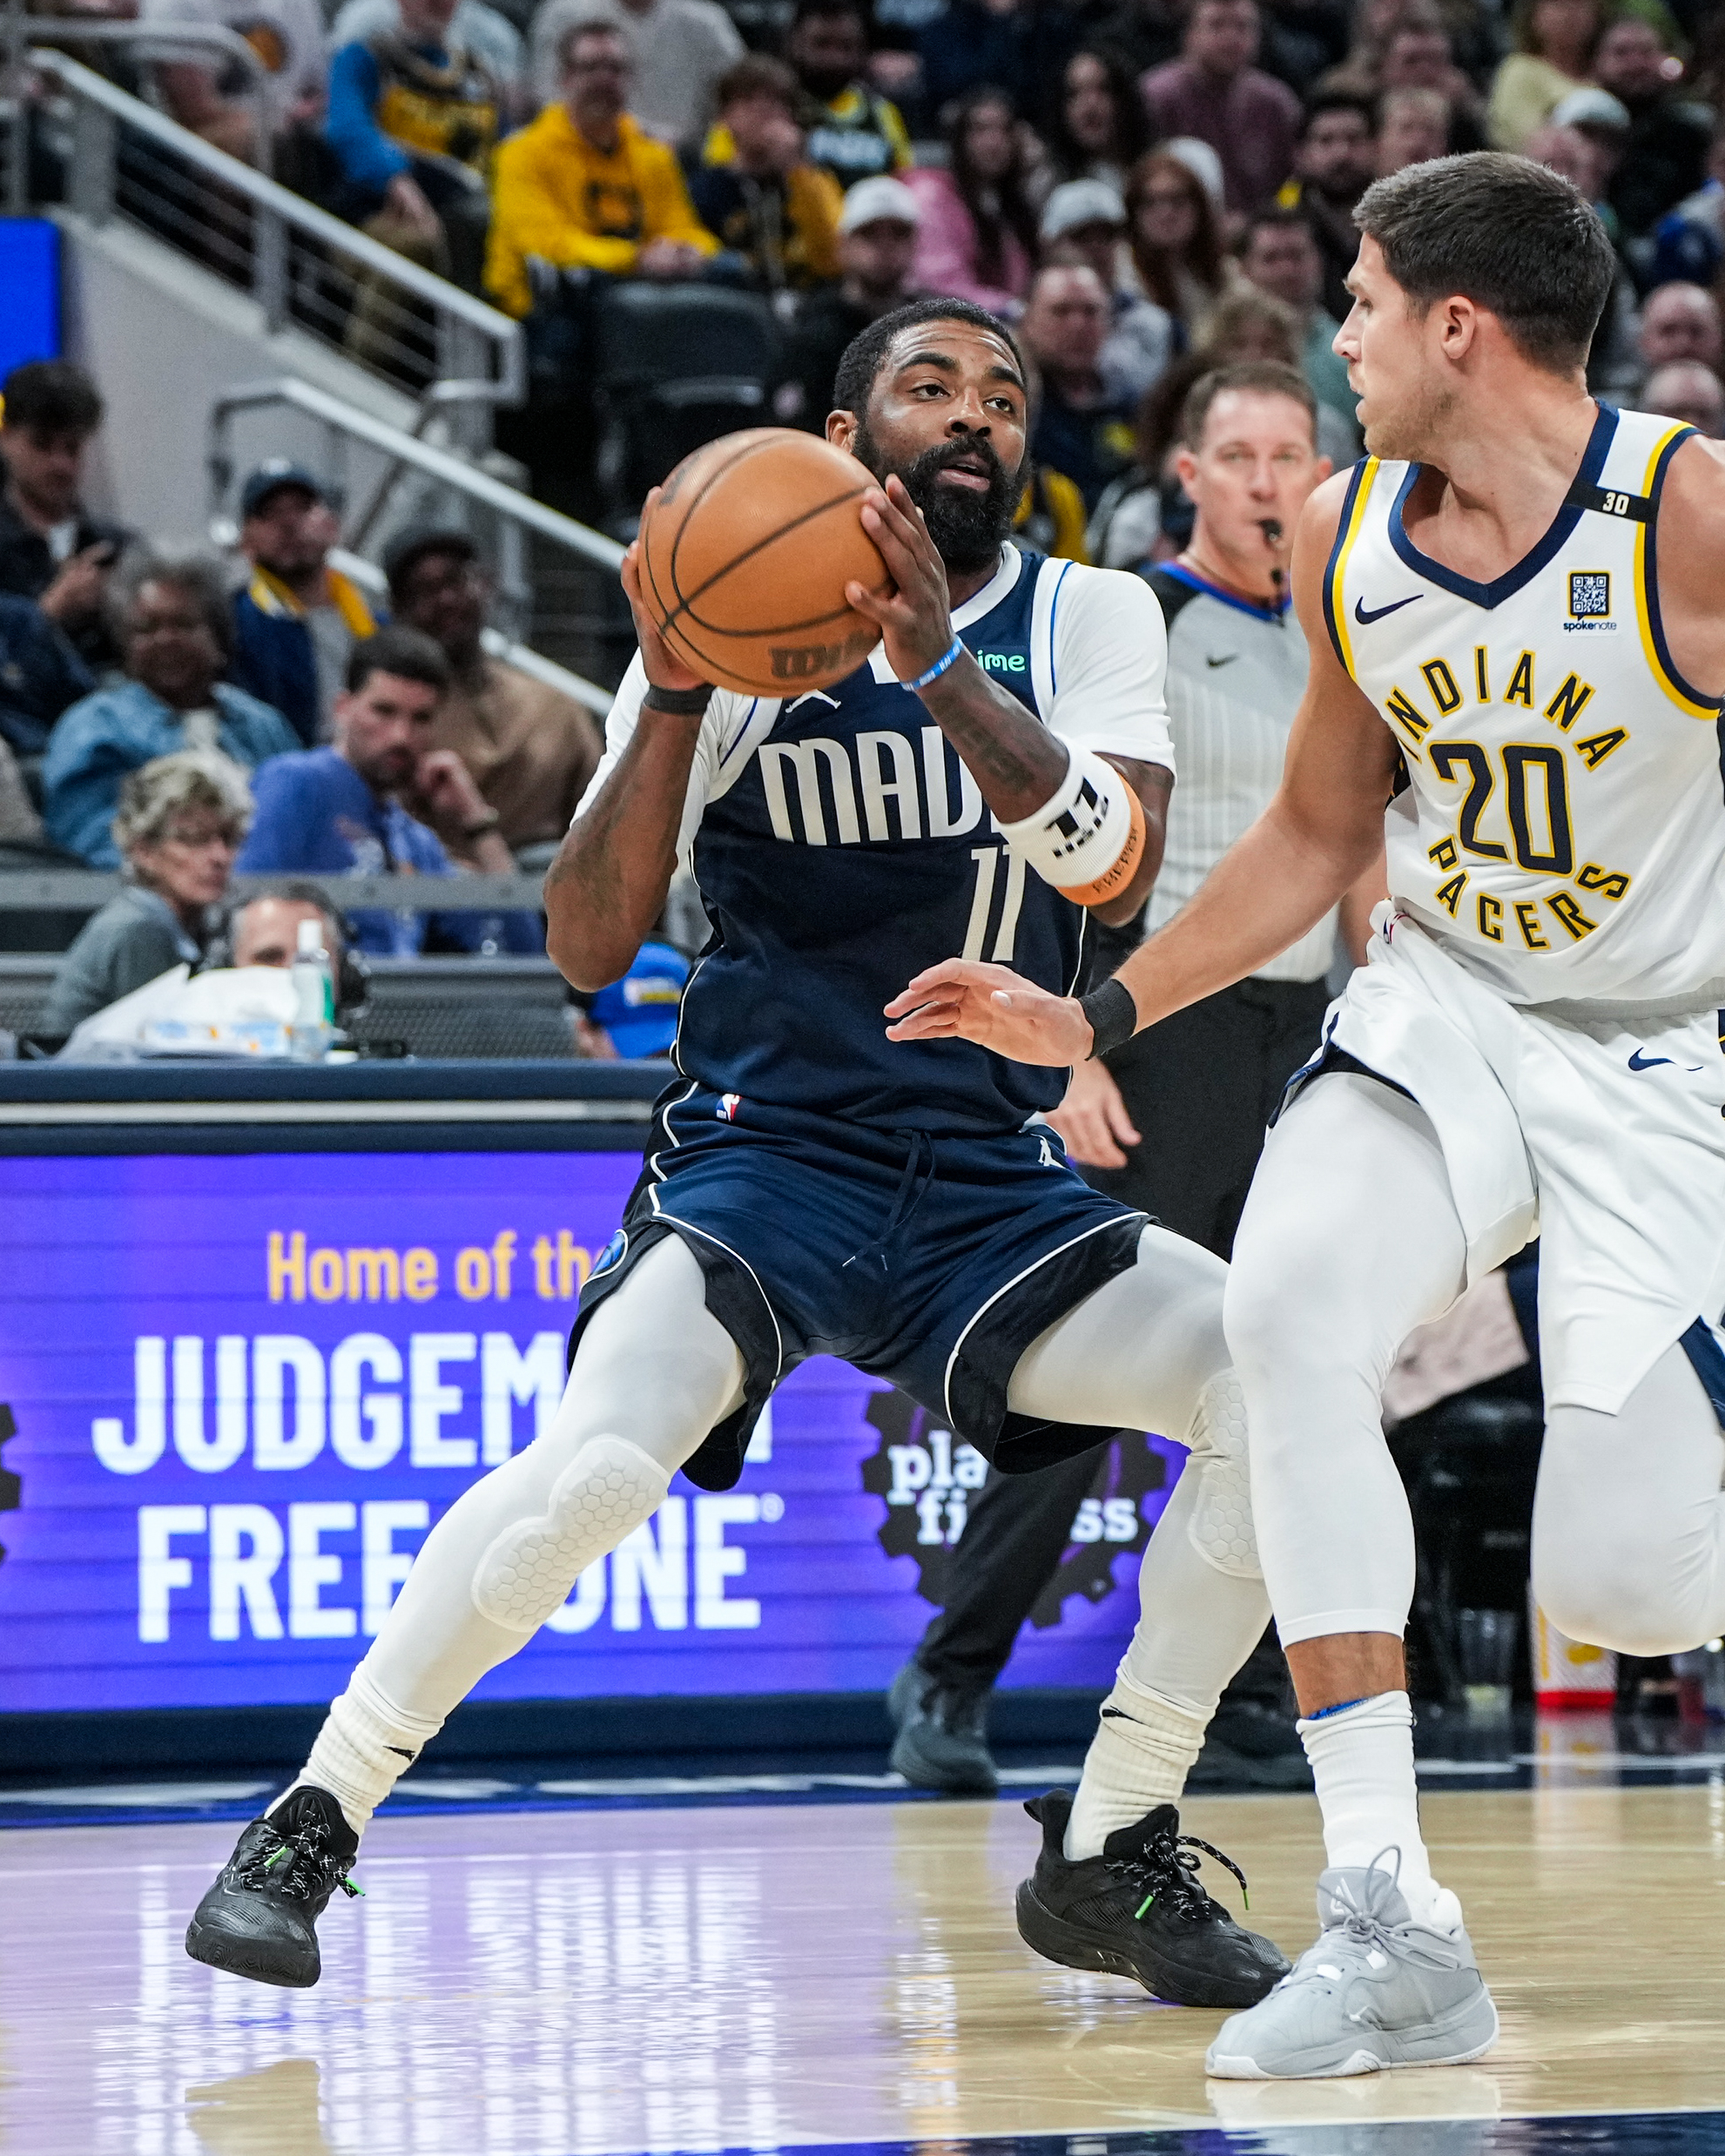 Turner scores season-high 33 points in Pacers' 133-111 win over